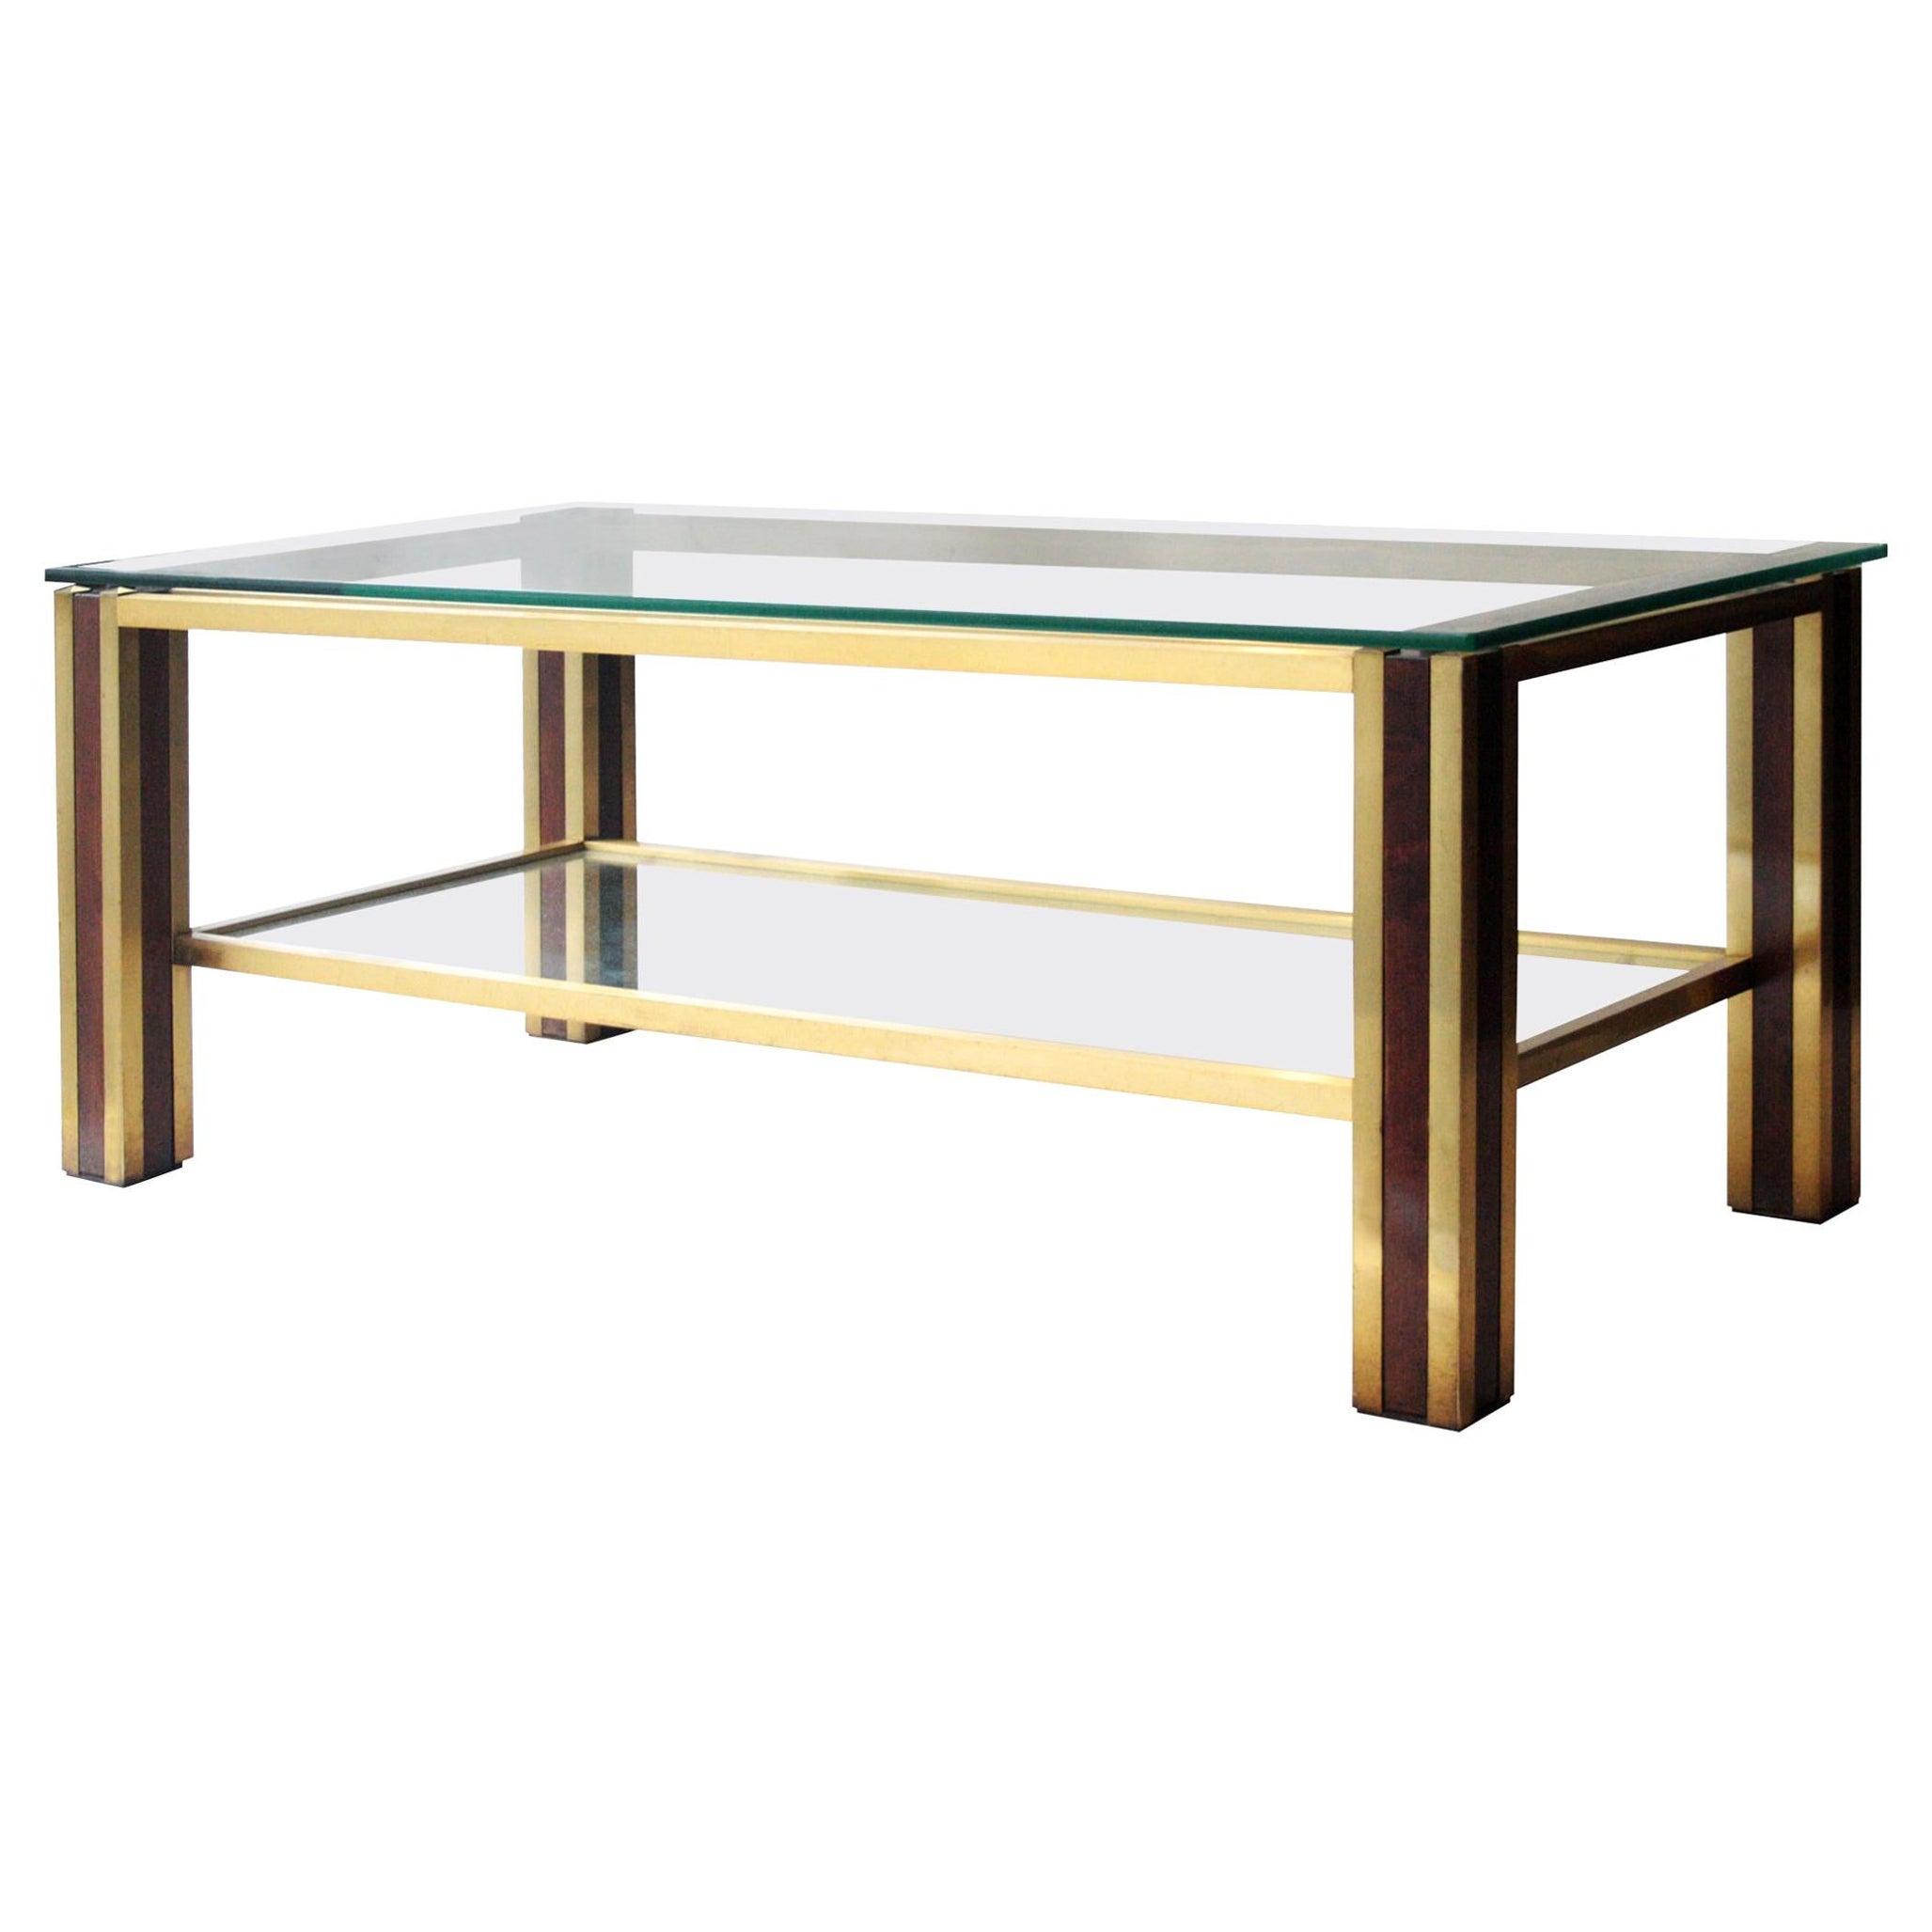 MidCentury Modern Table with Brass and Solid Walnut Wood Structure, France, 1970 For Sale